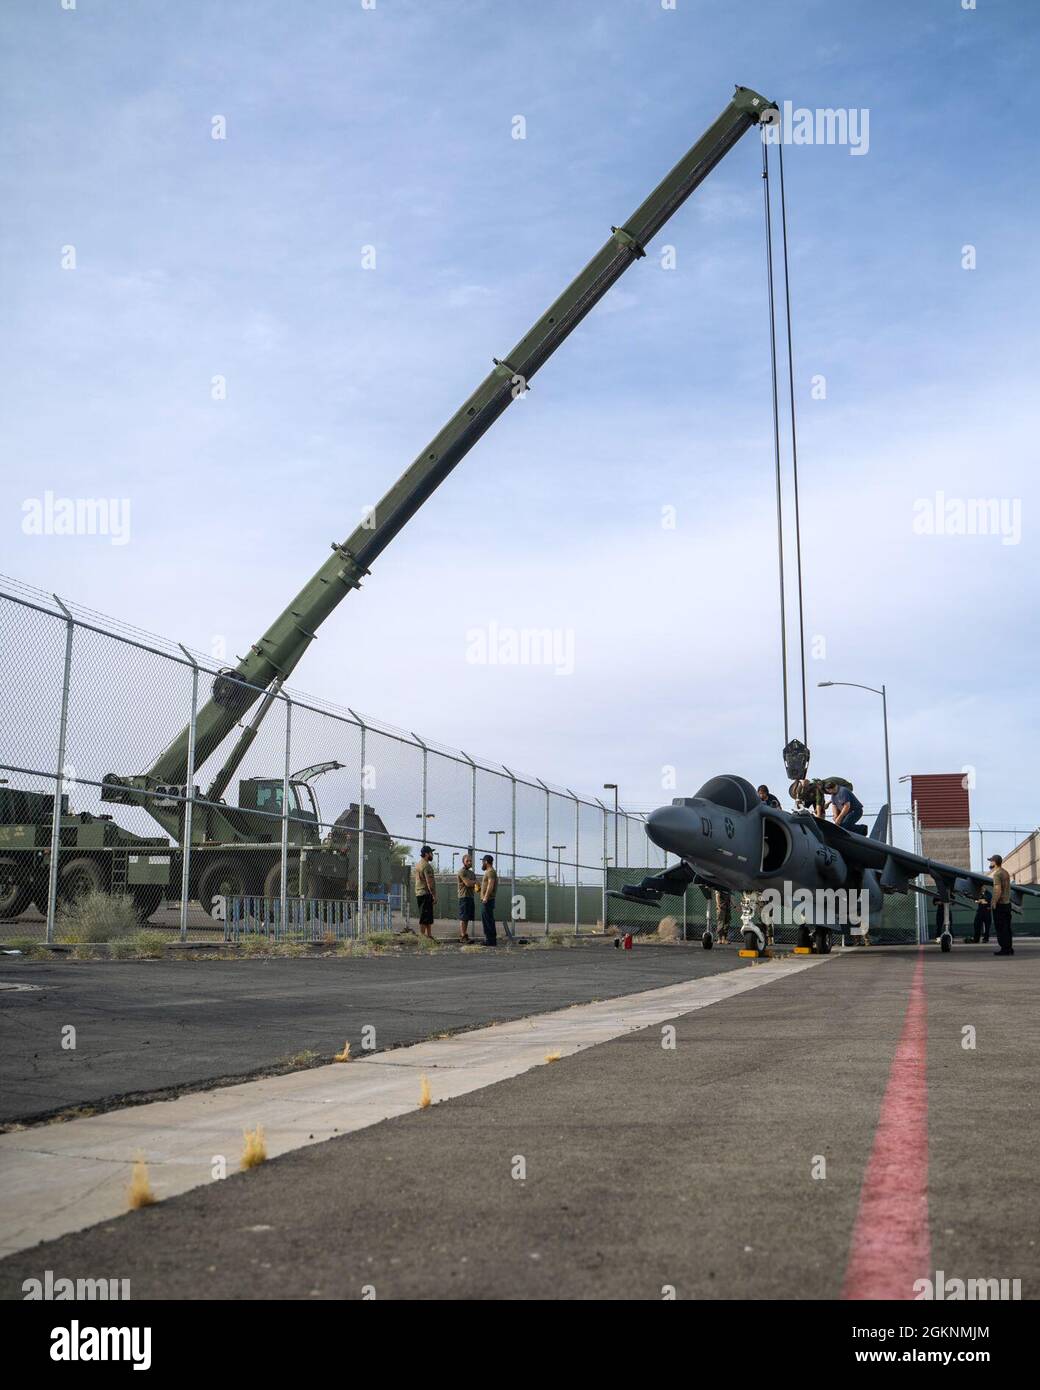 An AV-8B Harrier jet is lifted over a gate on Marine Corps Air Station Yuma, June 7, 2021. The Harrier is now a static display near the entrance of the Air Station. Stock Photo